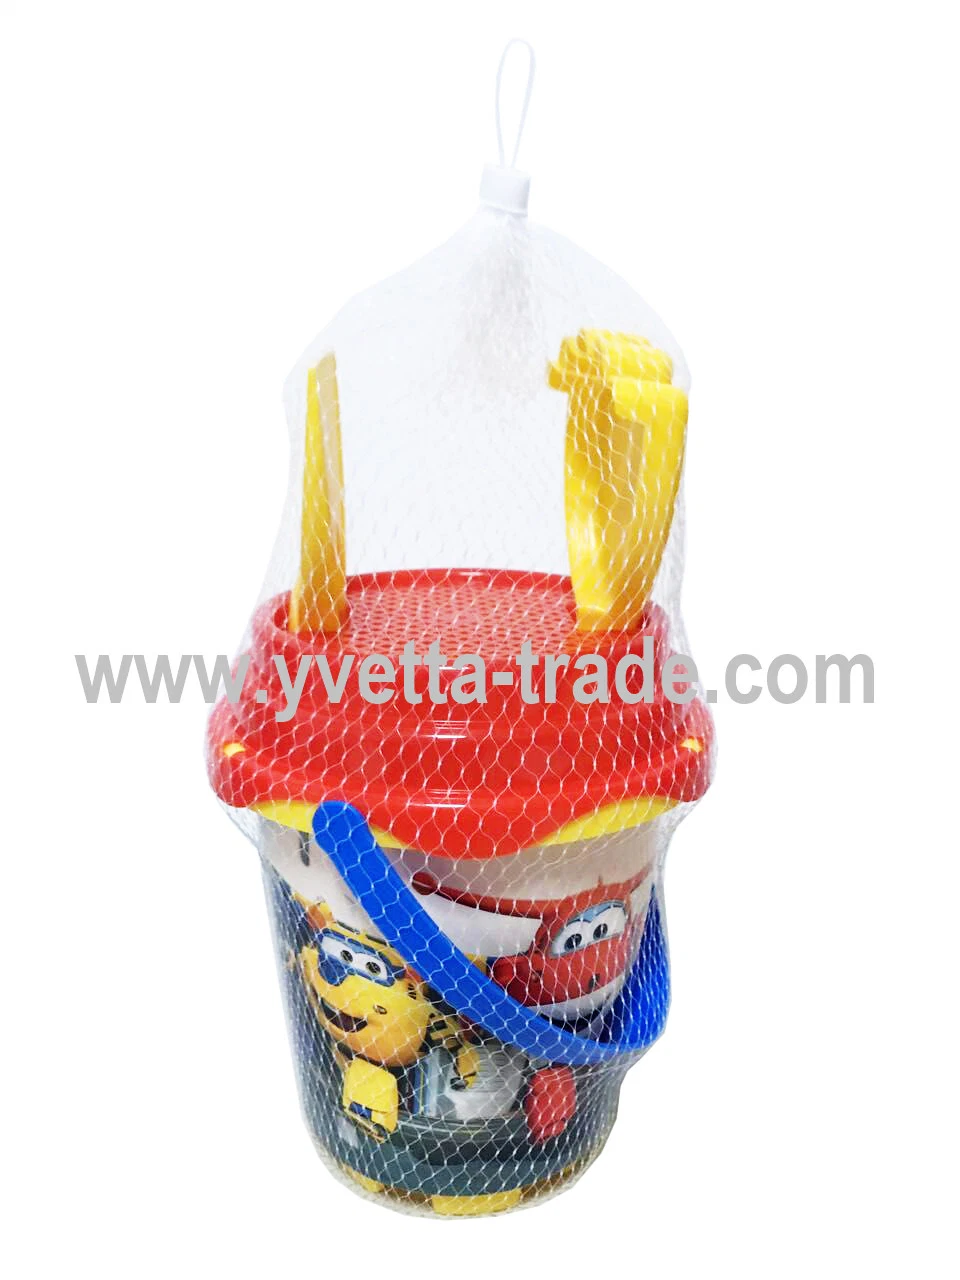 Sand Toy Products for Beach Bucket Set (YV-J020)